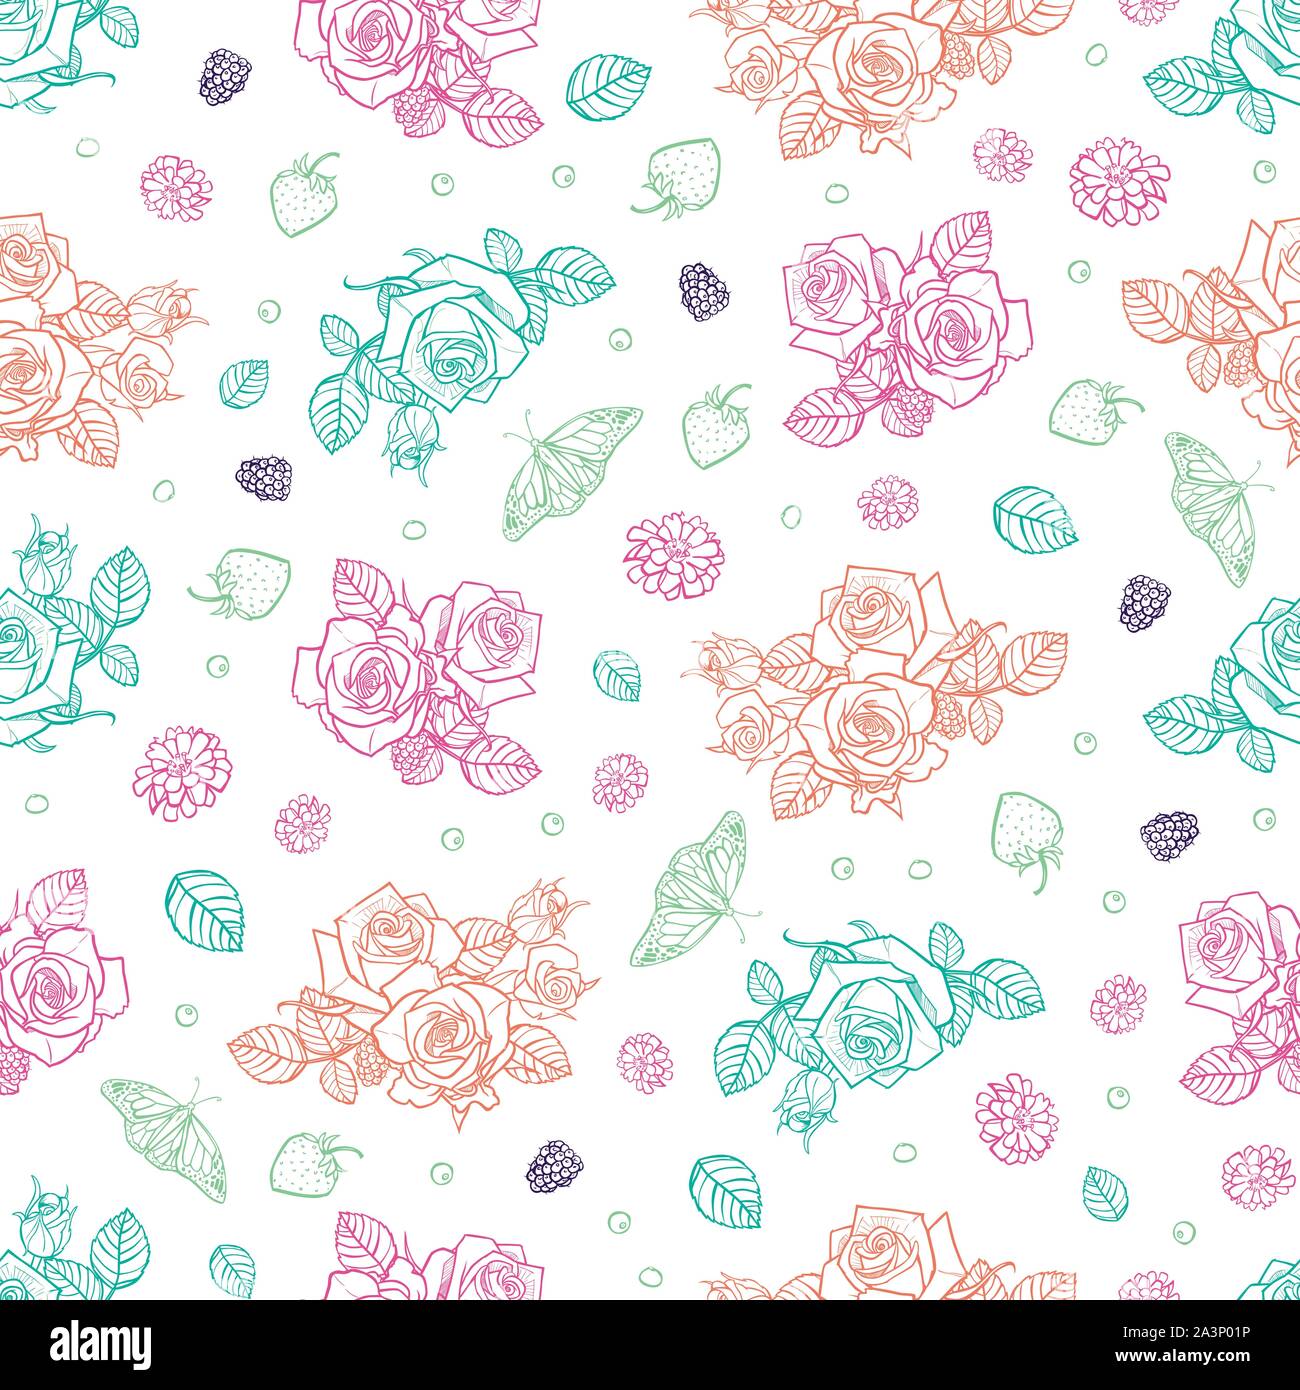 Vector white spaced out roses and berries seamless pattern. Perfect for fabric, scrapbooking and wallpaper projects. Stock Vector